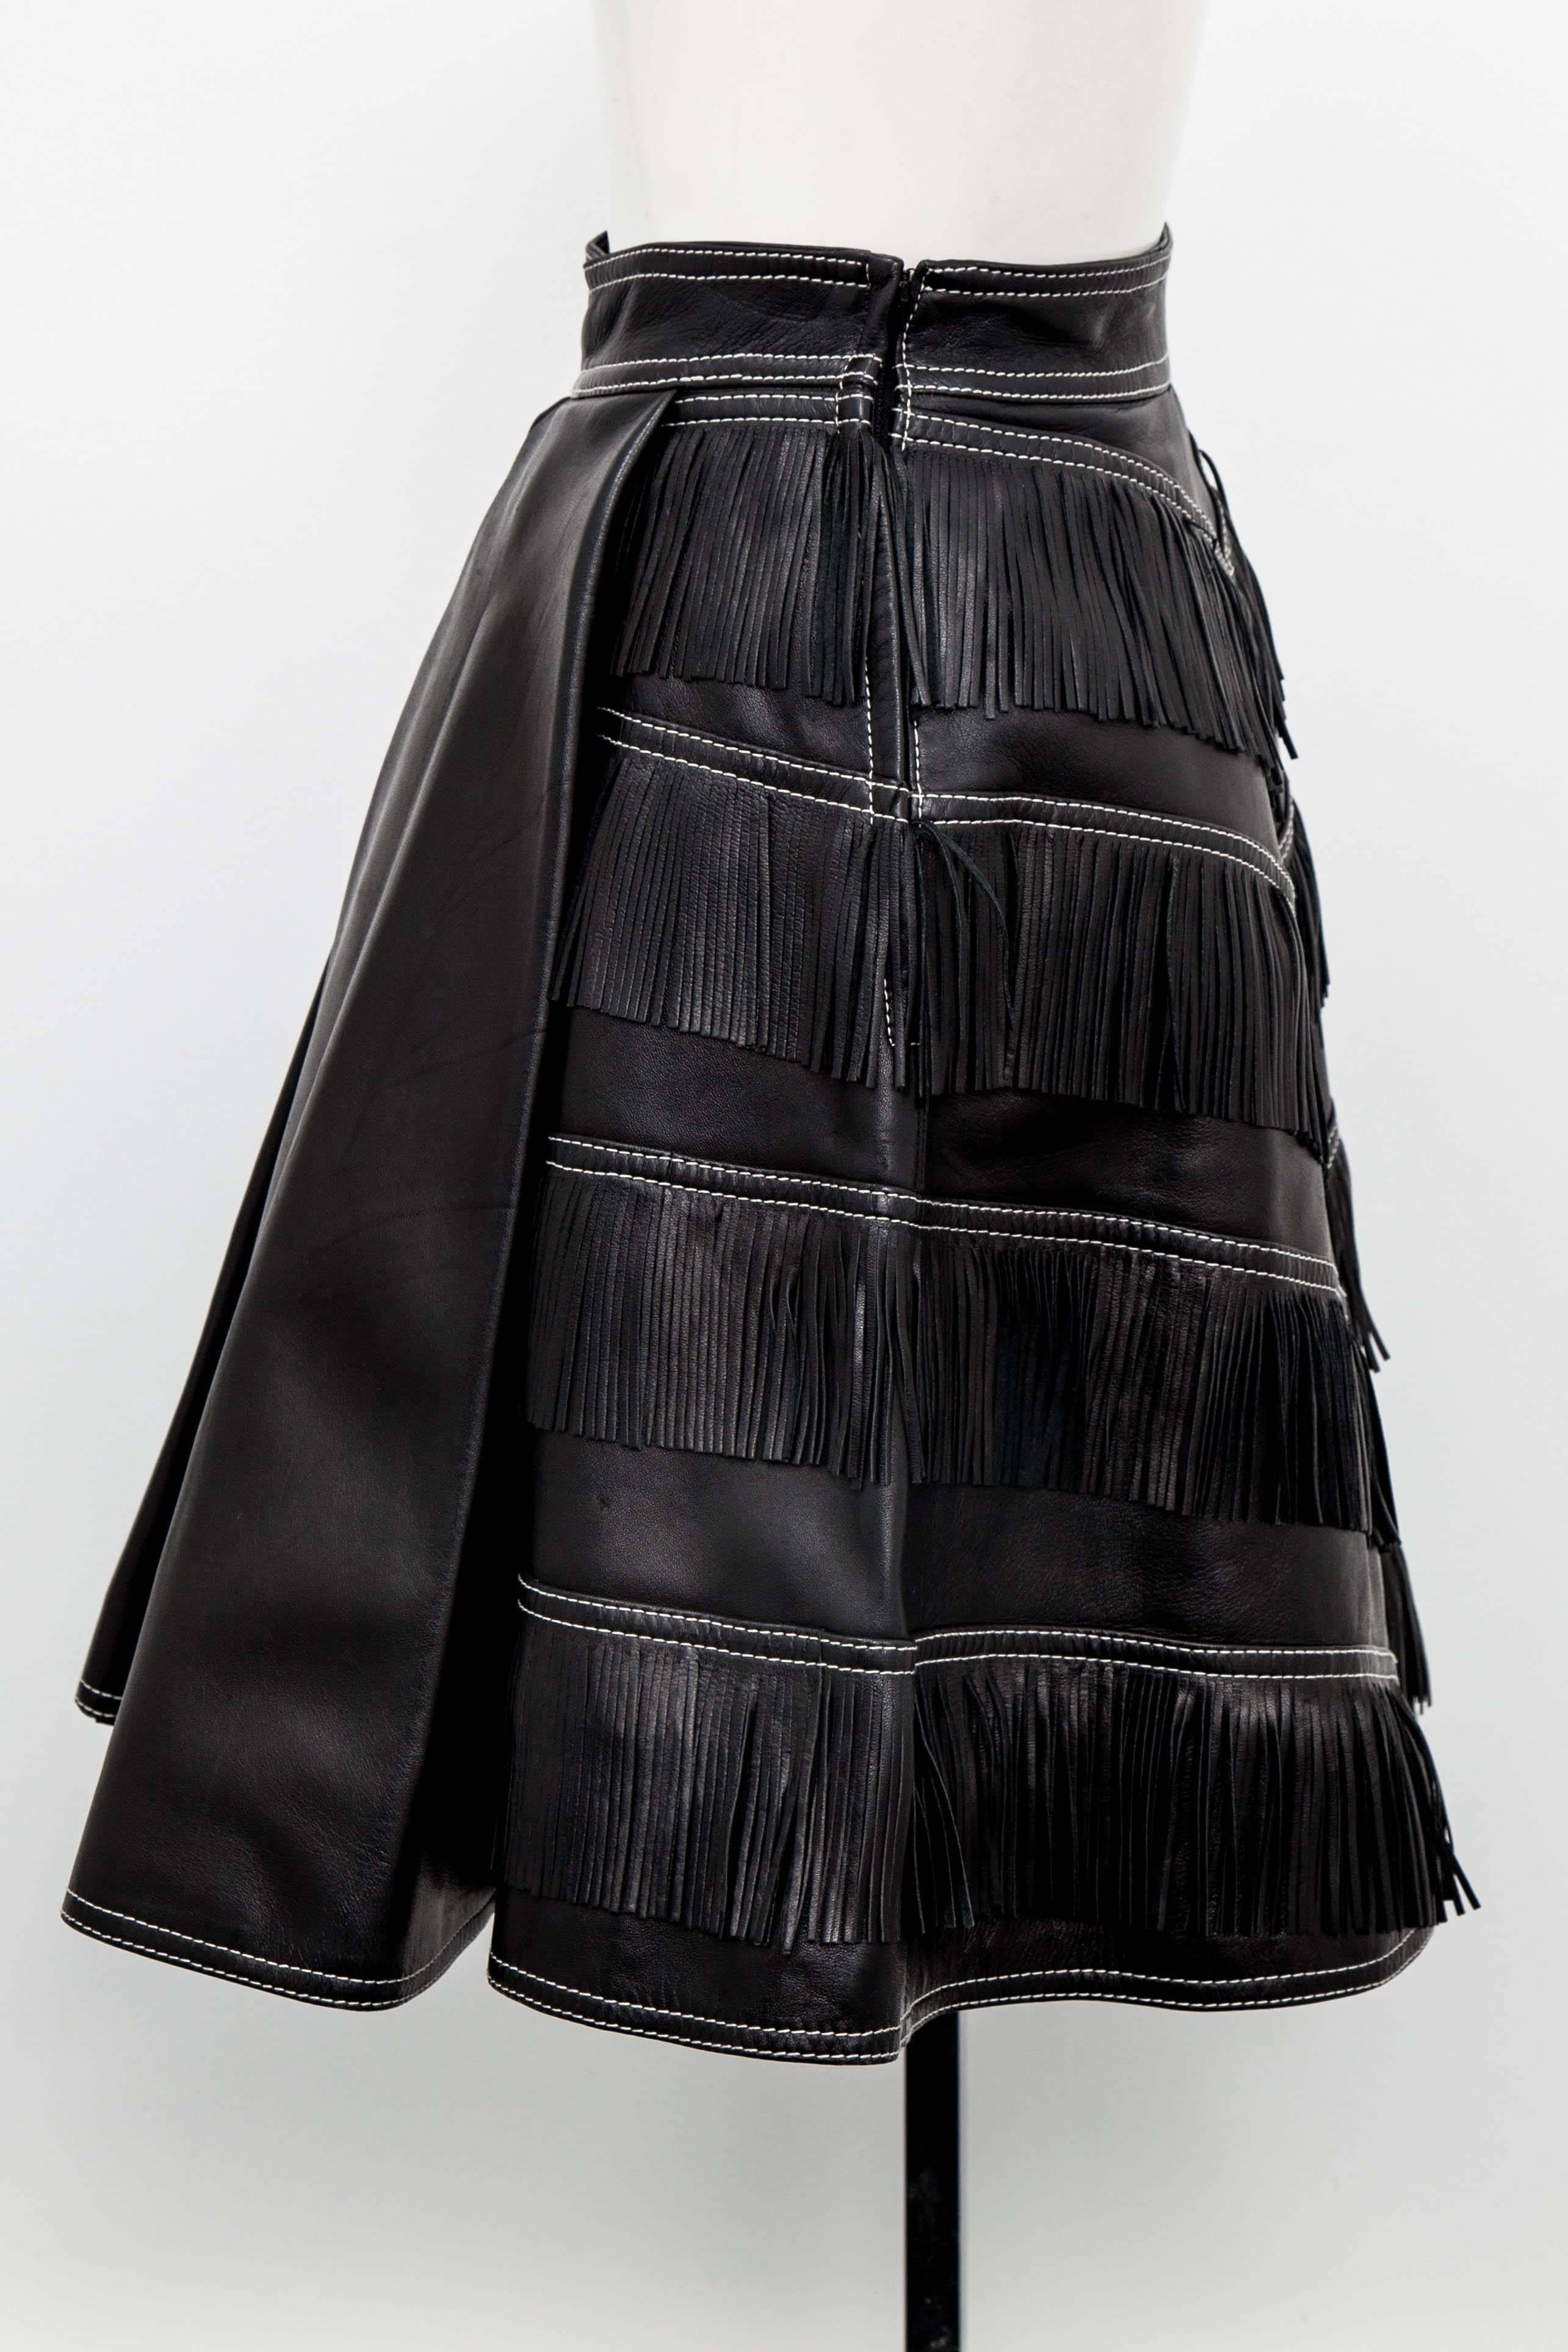 Gianni Versace Iconic 1992 Runway Black Leather Fringe Skirt In Excellent Condition In Chicago, IL